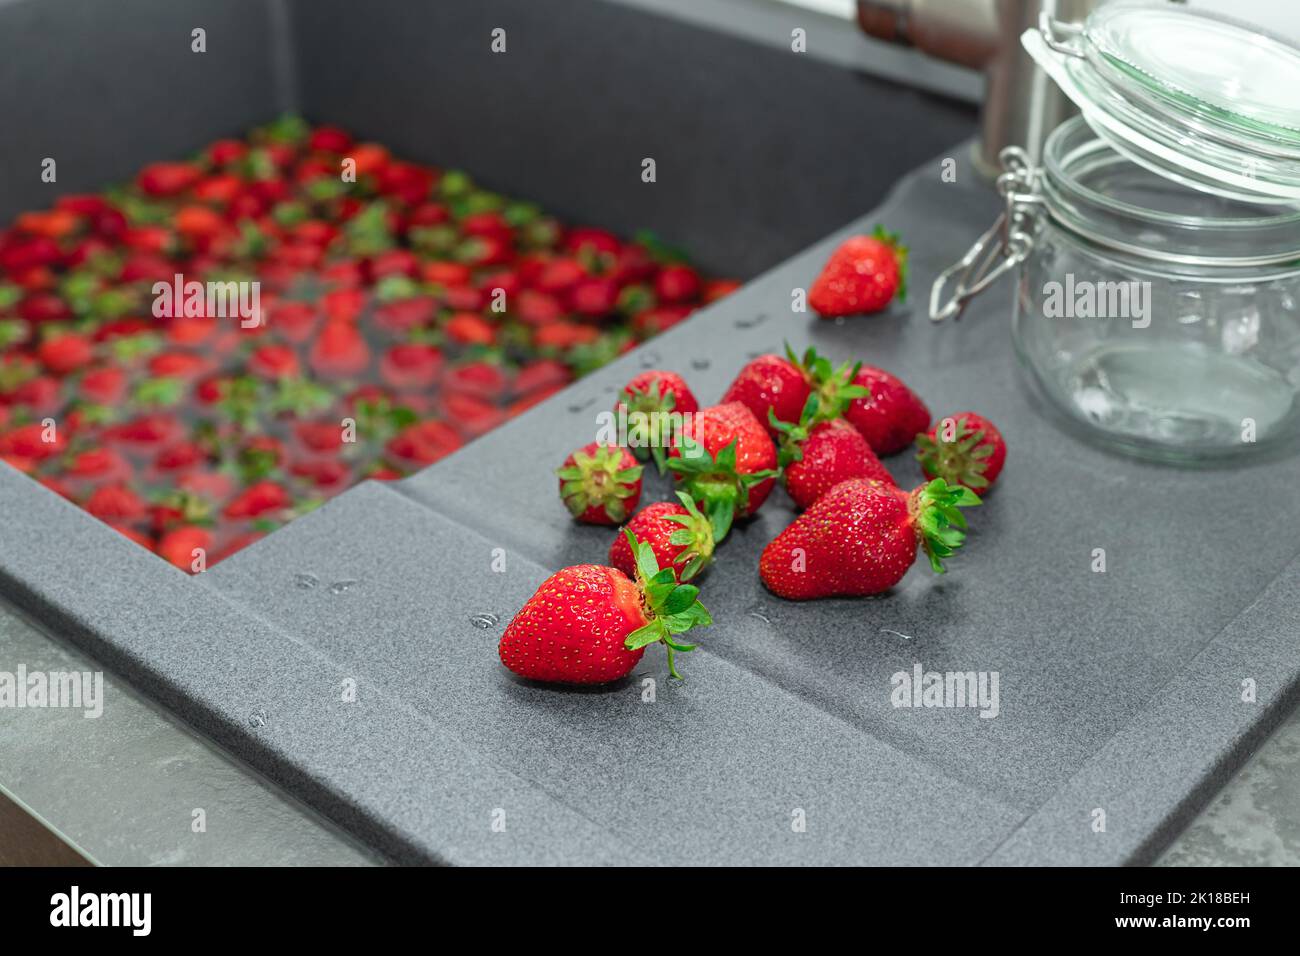 heap of ripe strawberries on kitchen counter top. process of making strawberry jam or dessert Stock Photo